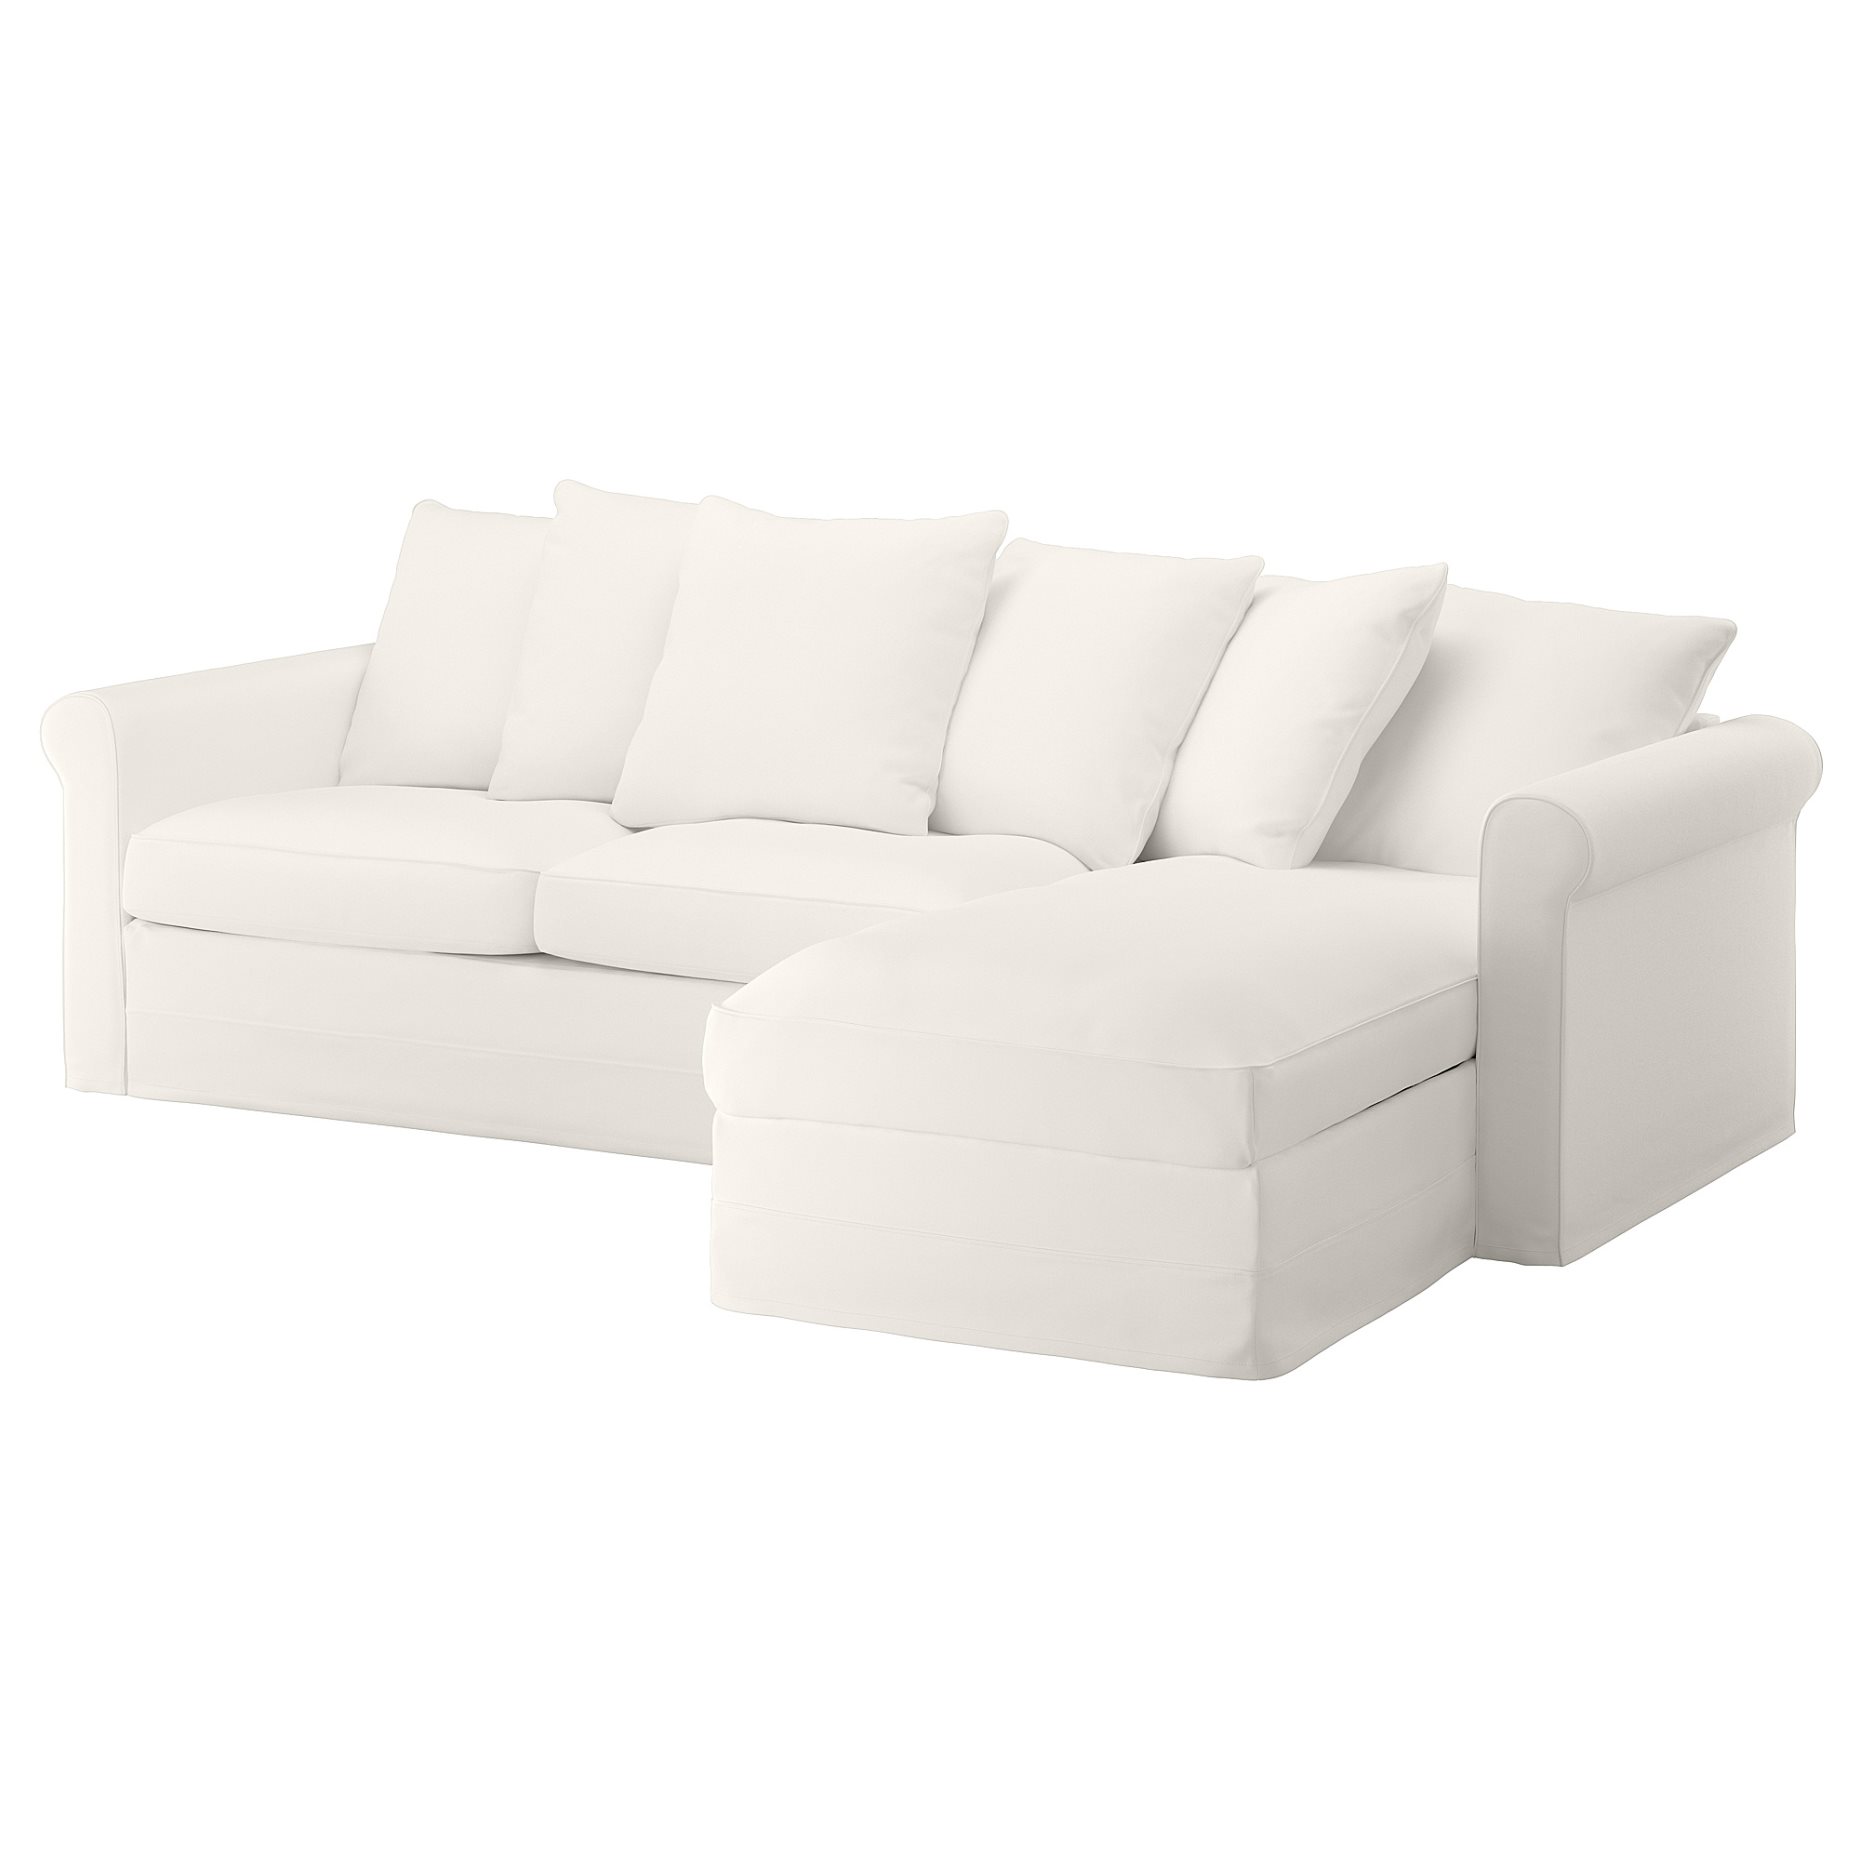 GRÖNLID, 3-seat sofa-bed with chaise longue, 295.365.48